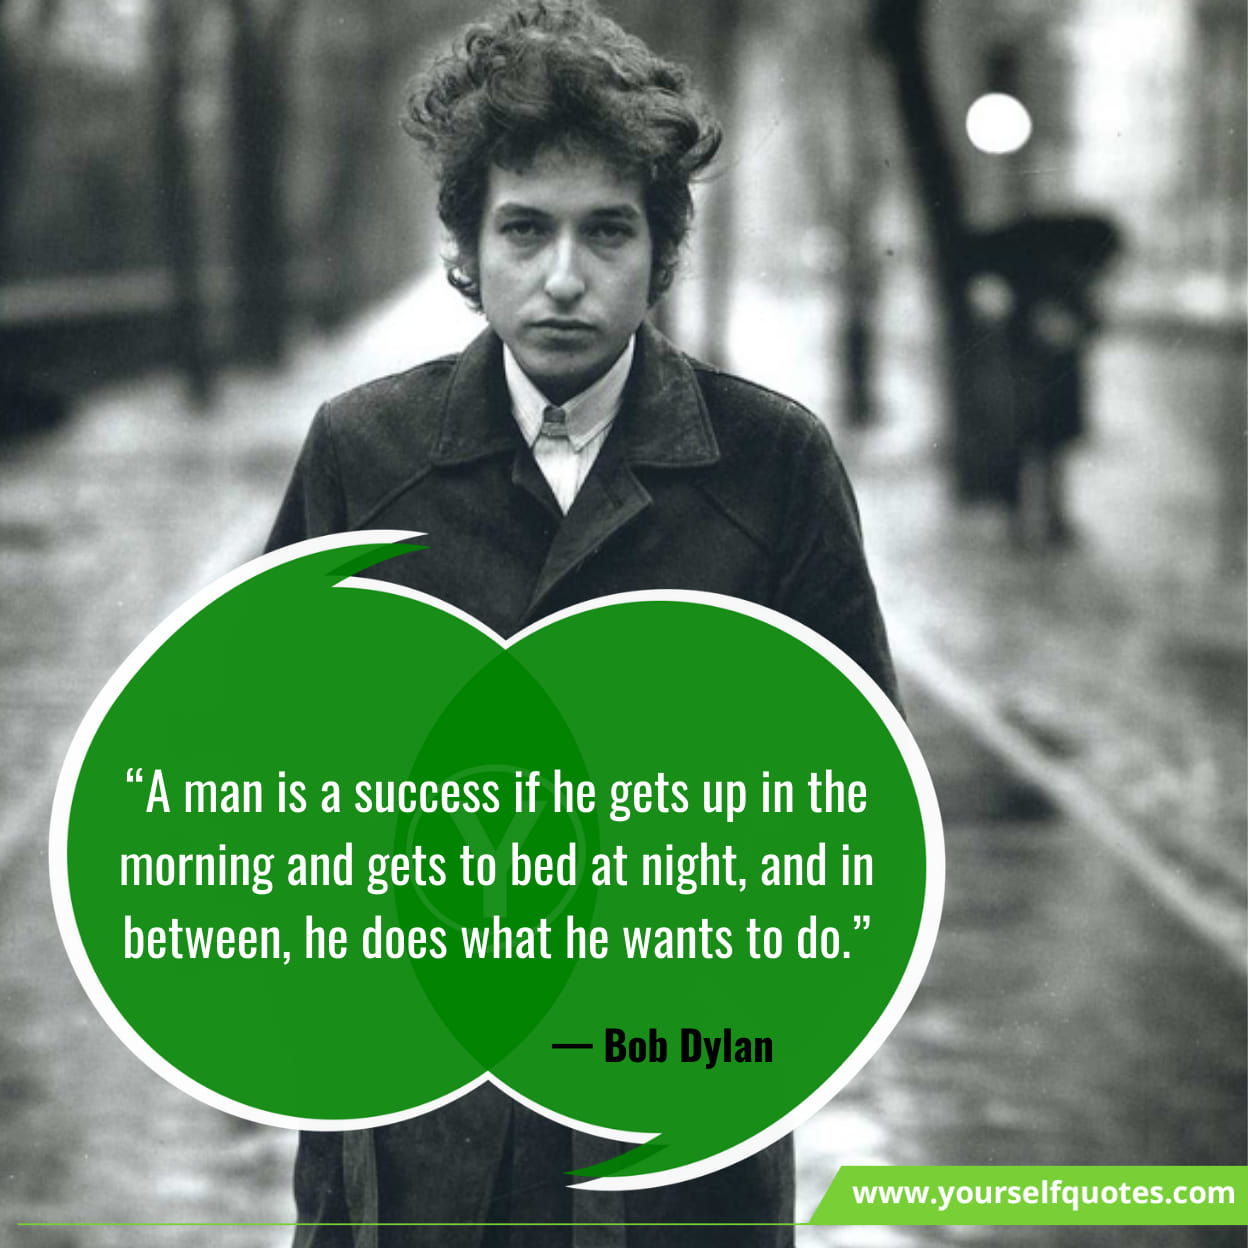 Bob Dylan Quotes for Success